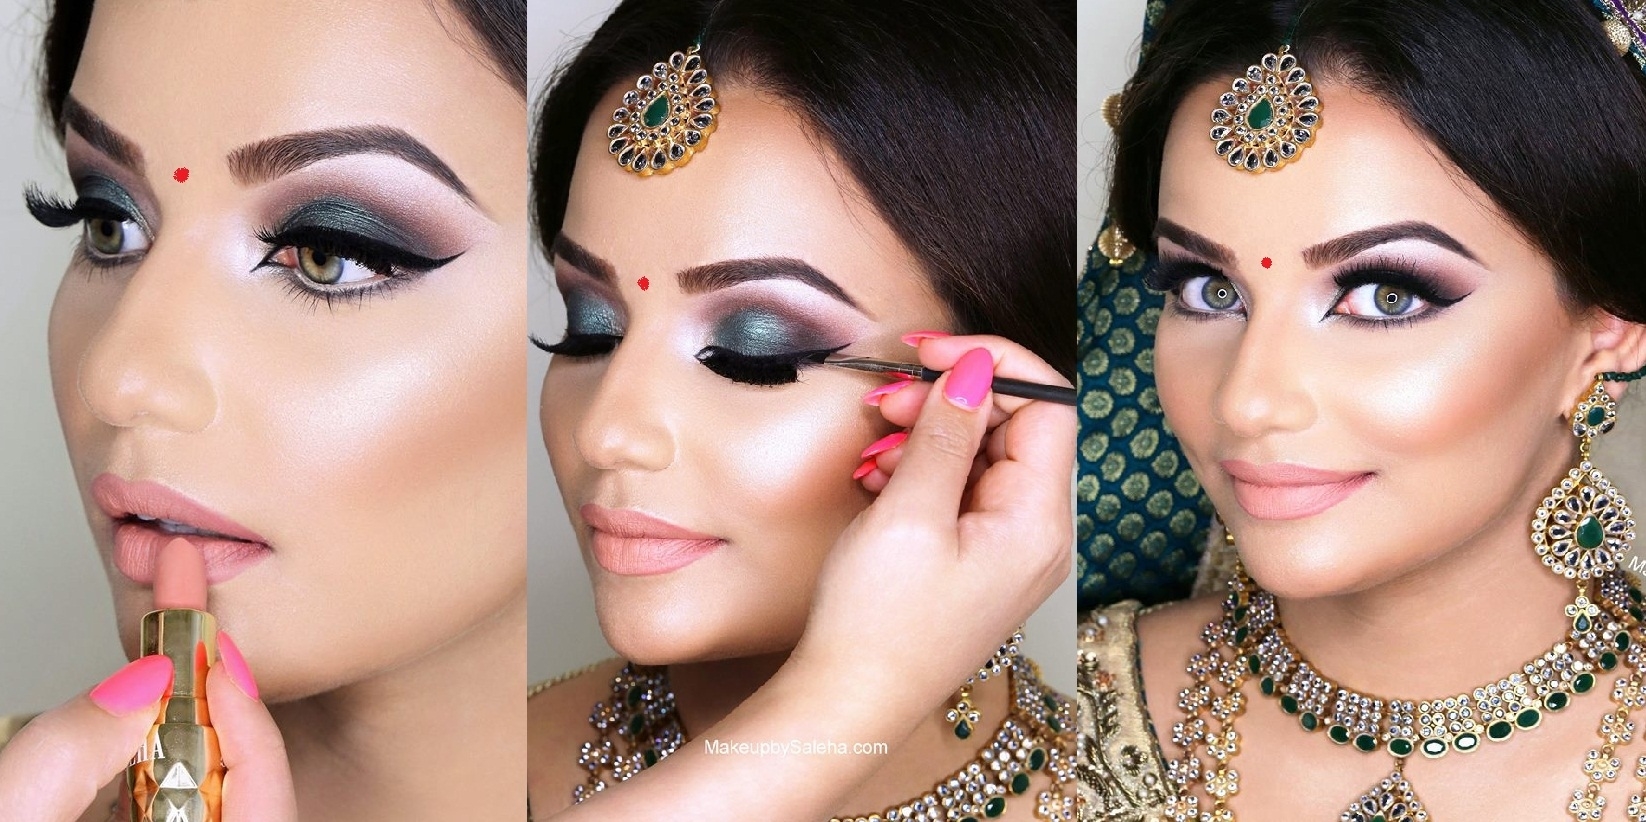 How To Apply Indian Bridal Makeup Step By Step With Pictures - Wavy Haircut